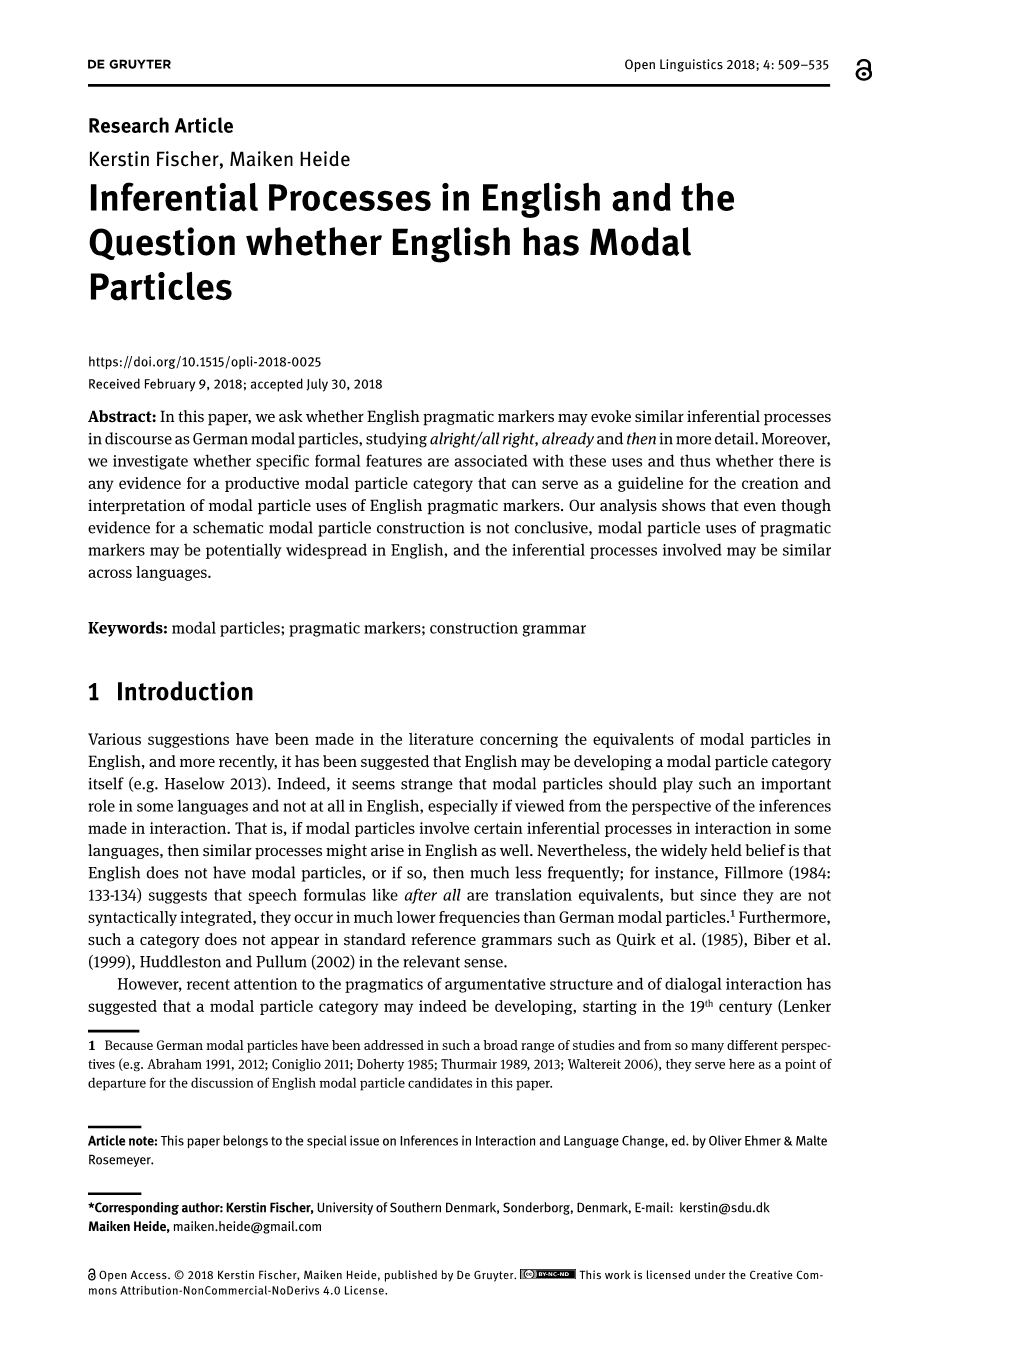 Inferential Processes in English and the Question Whether English Has Modal Particles